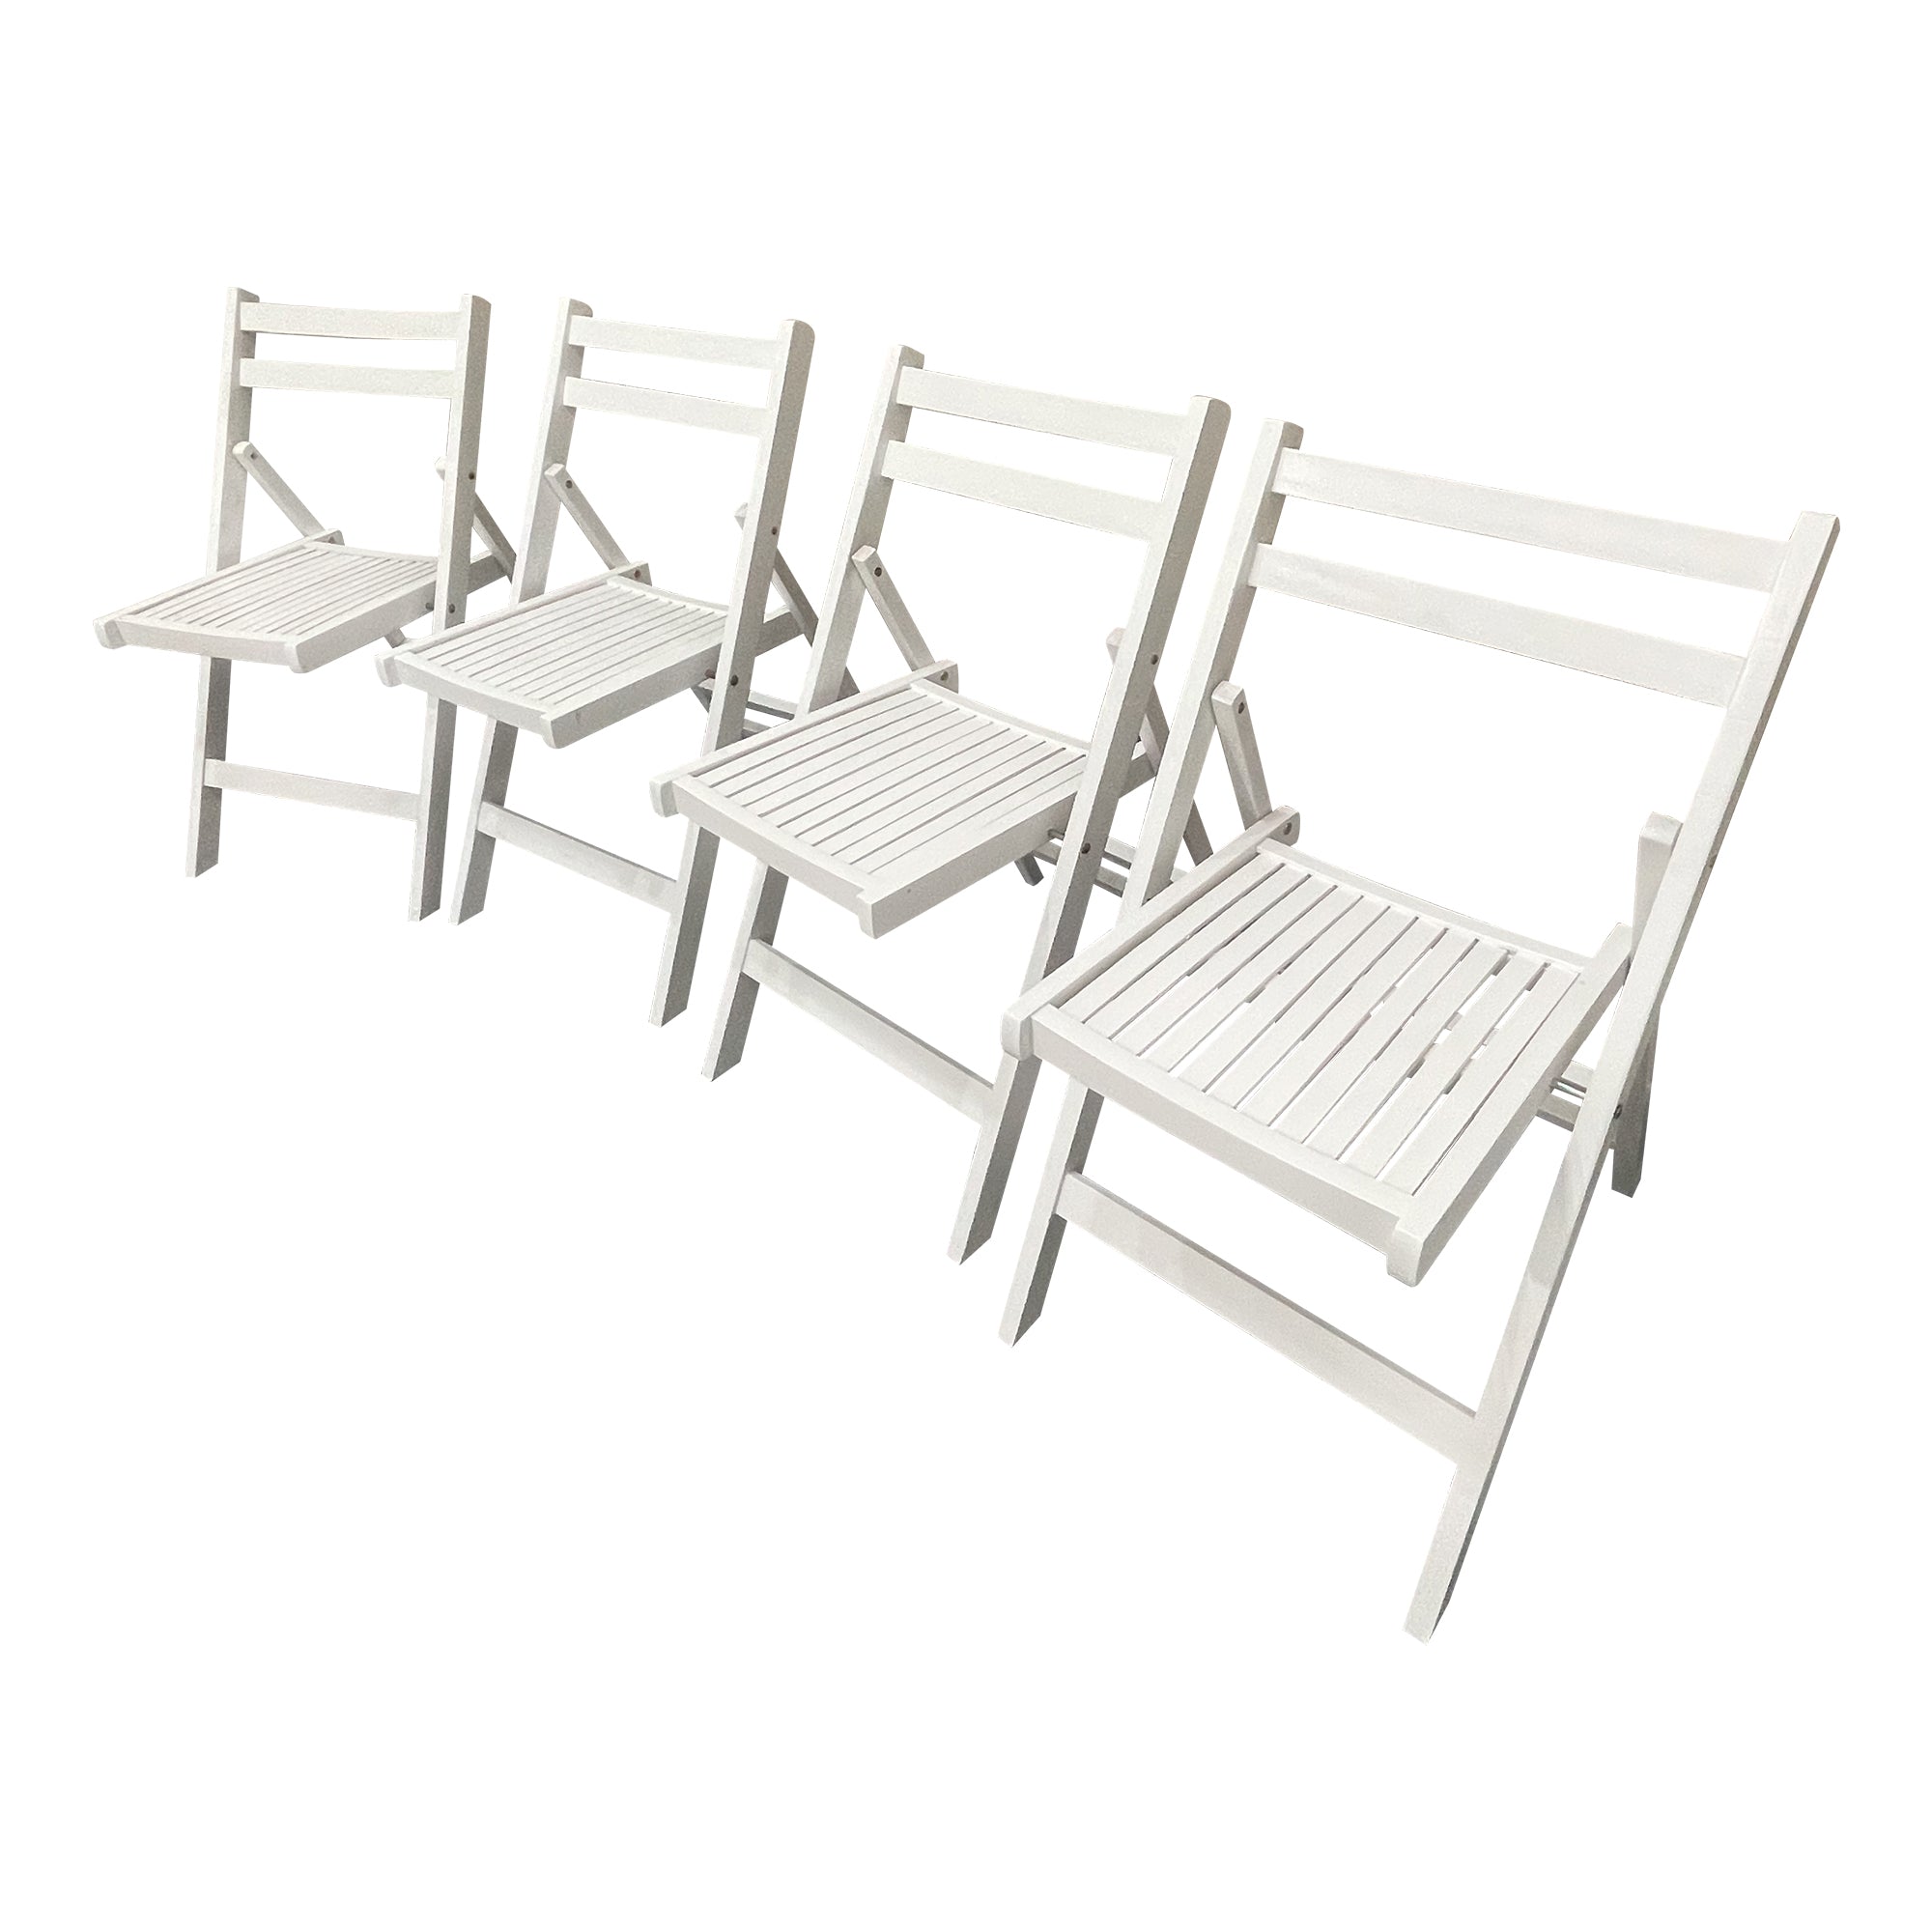 ZNTS Furniture Slatted Wood Folding Special Event Chair - White, Set of 4, FOLDING CHAIR, FOLDABLE STYLE W49532961